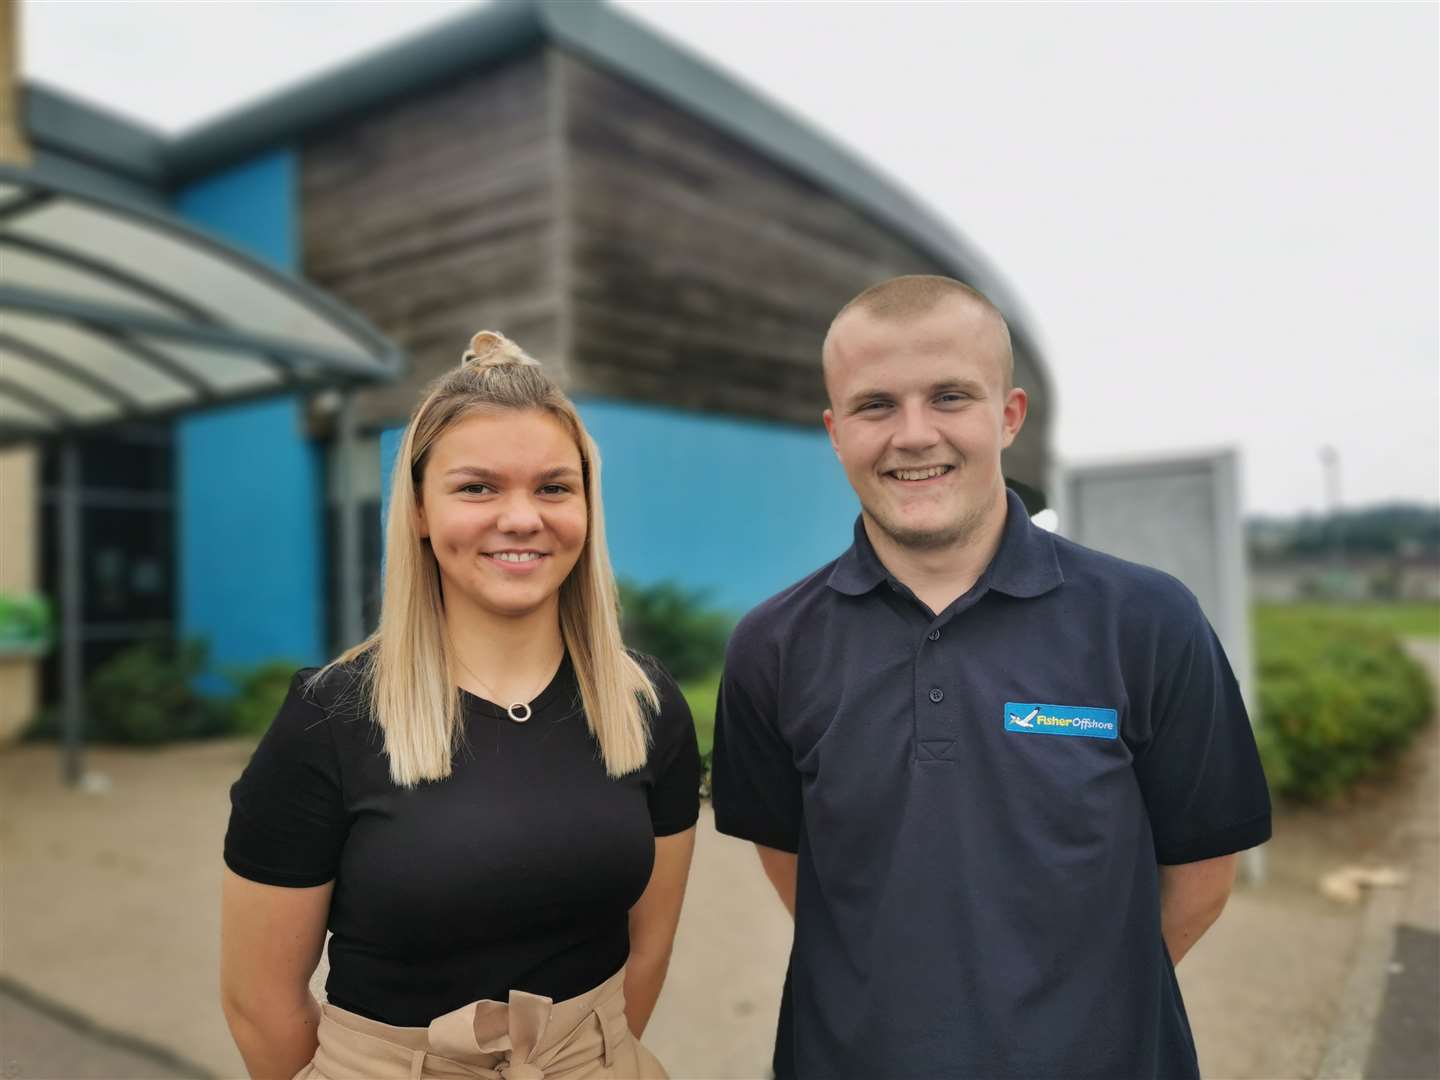 Former Meldrum Academy pupil Ellen Collie is now undertaking a modern apprenticeship in business and administration at James Fisher Offshore. She is with fellow modern apprentice Nathan Peden, who is studying engineering maintenance.